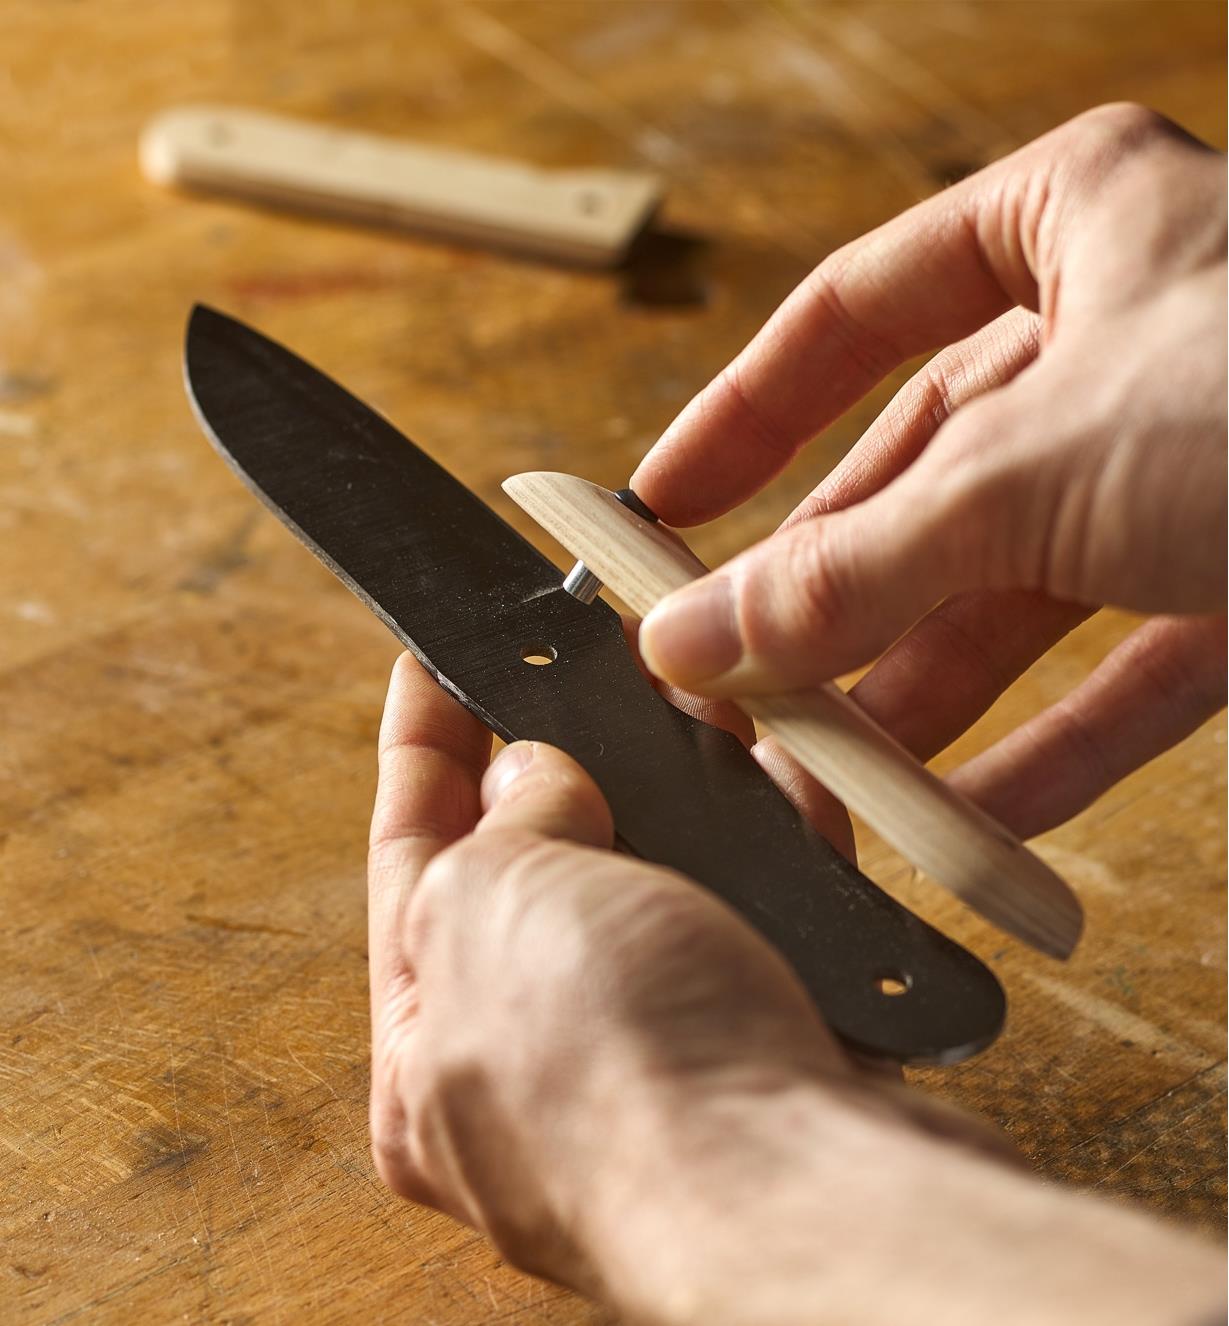 Fitting custom-made wooden handle scales onto the tang of a BeaverCraft belt knife kit